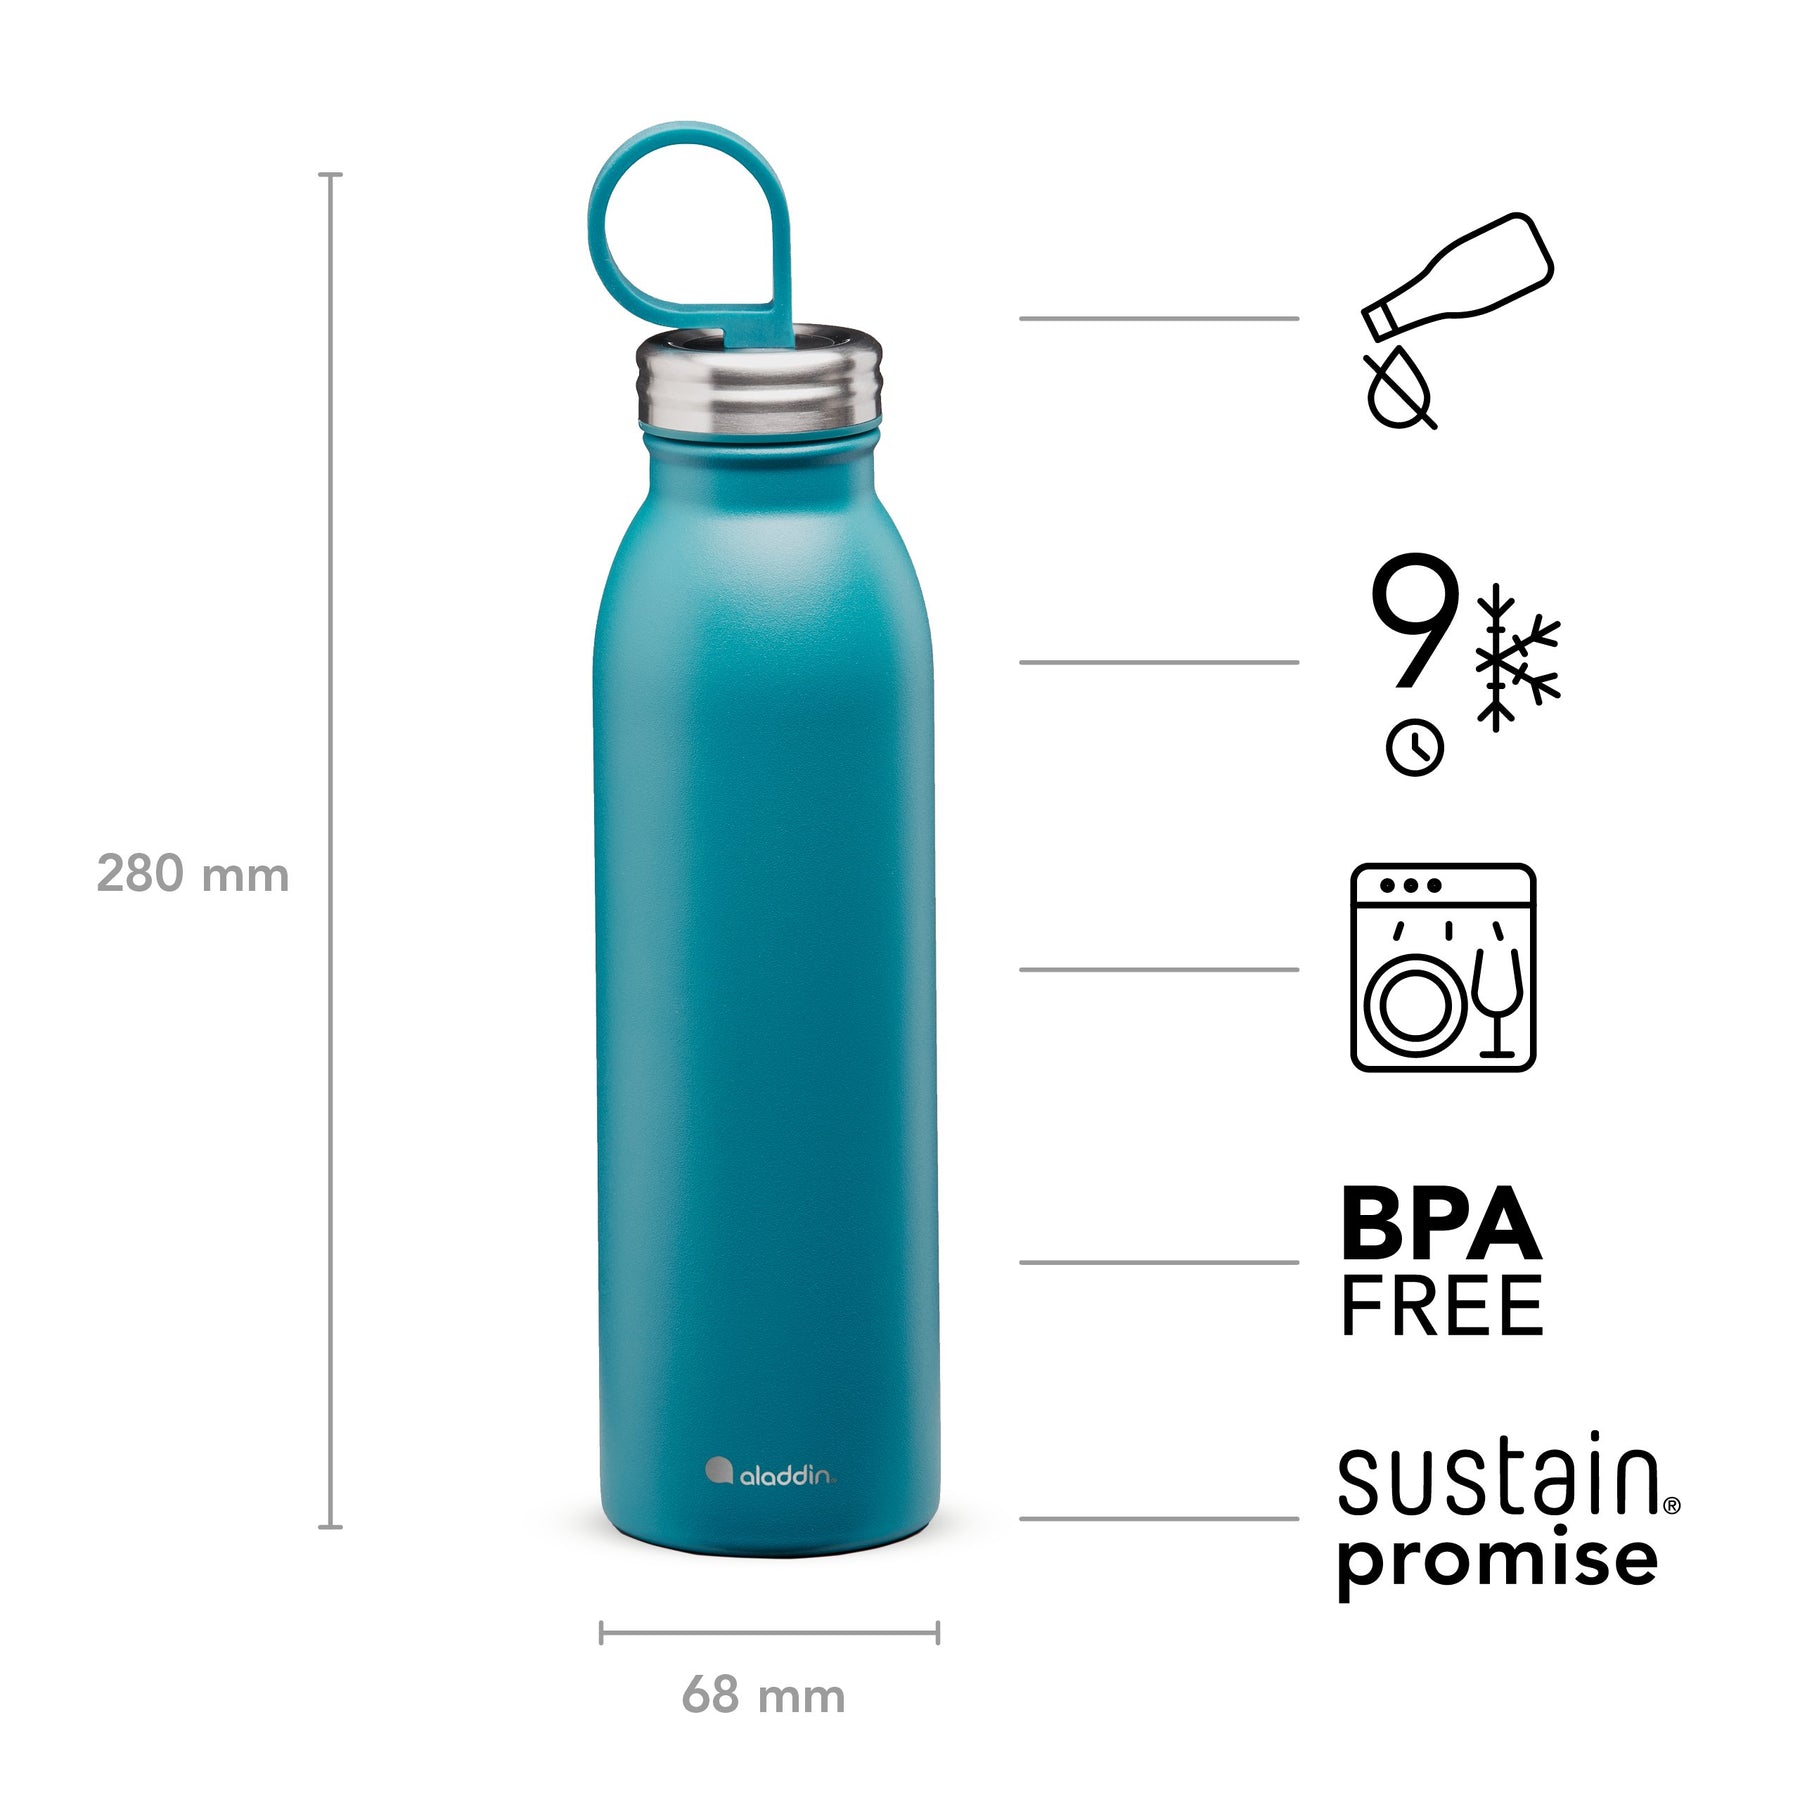 Aladdin-Chilled-Thermavac_-Colour-Stainless-Steel-Water-Bottle-0.55L-Aqua-Blue-10-09425-004-Icons-Front_1800x1800